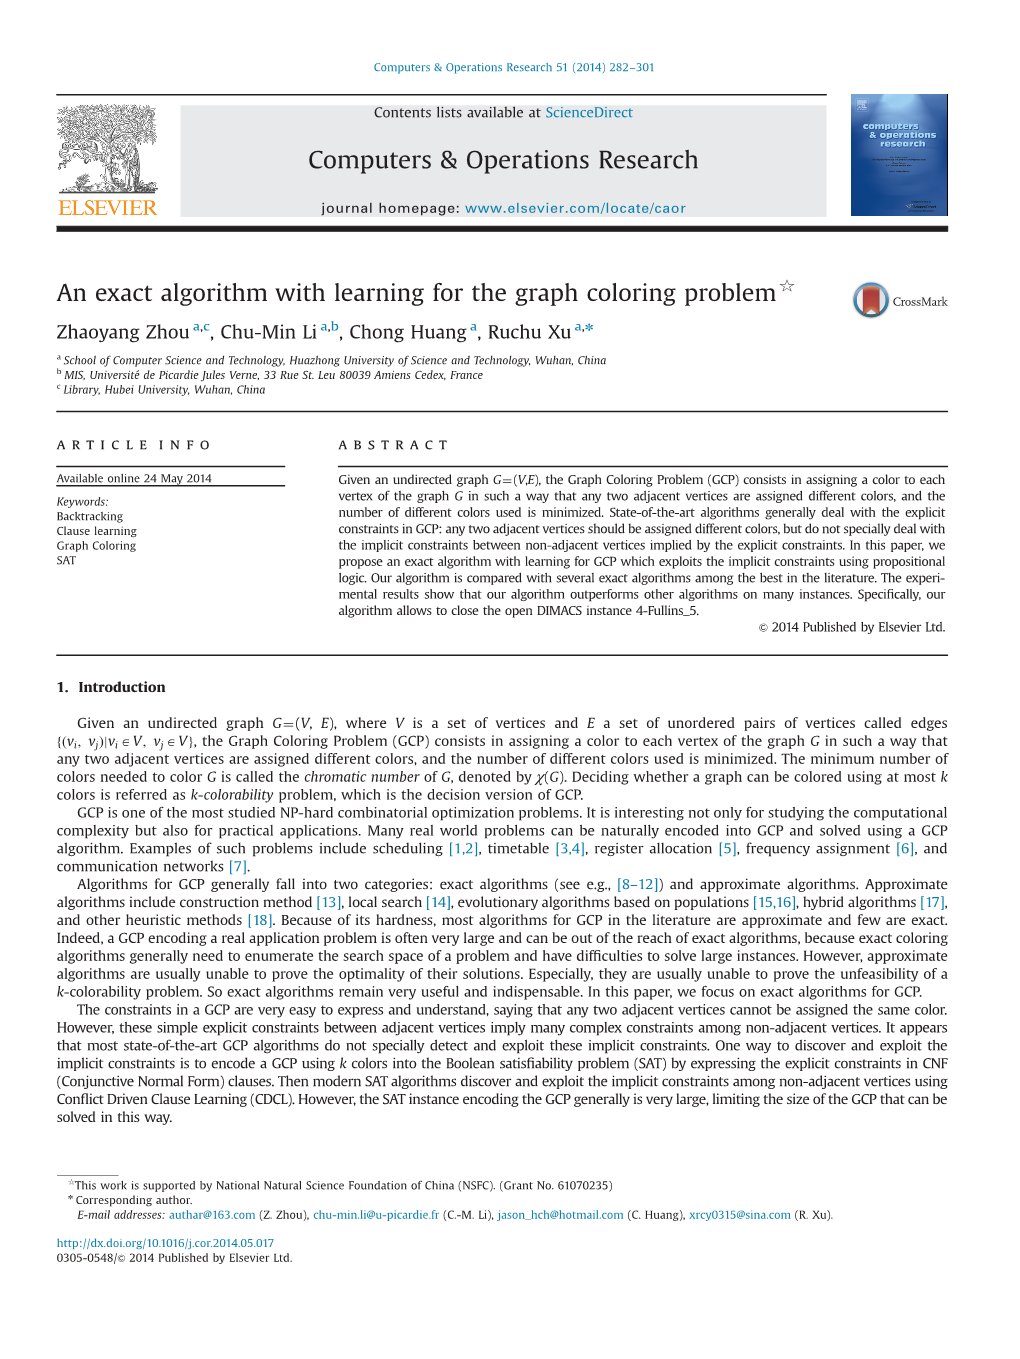 An Exact Algorithm with Learning for the Graph Coloring Problem$